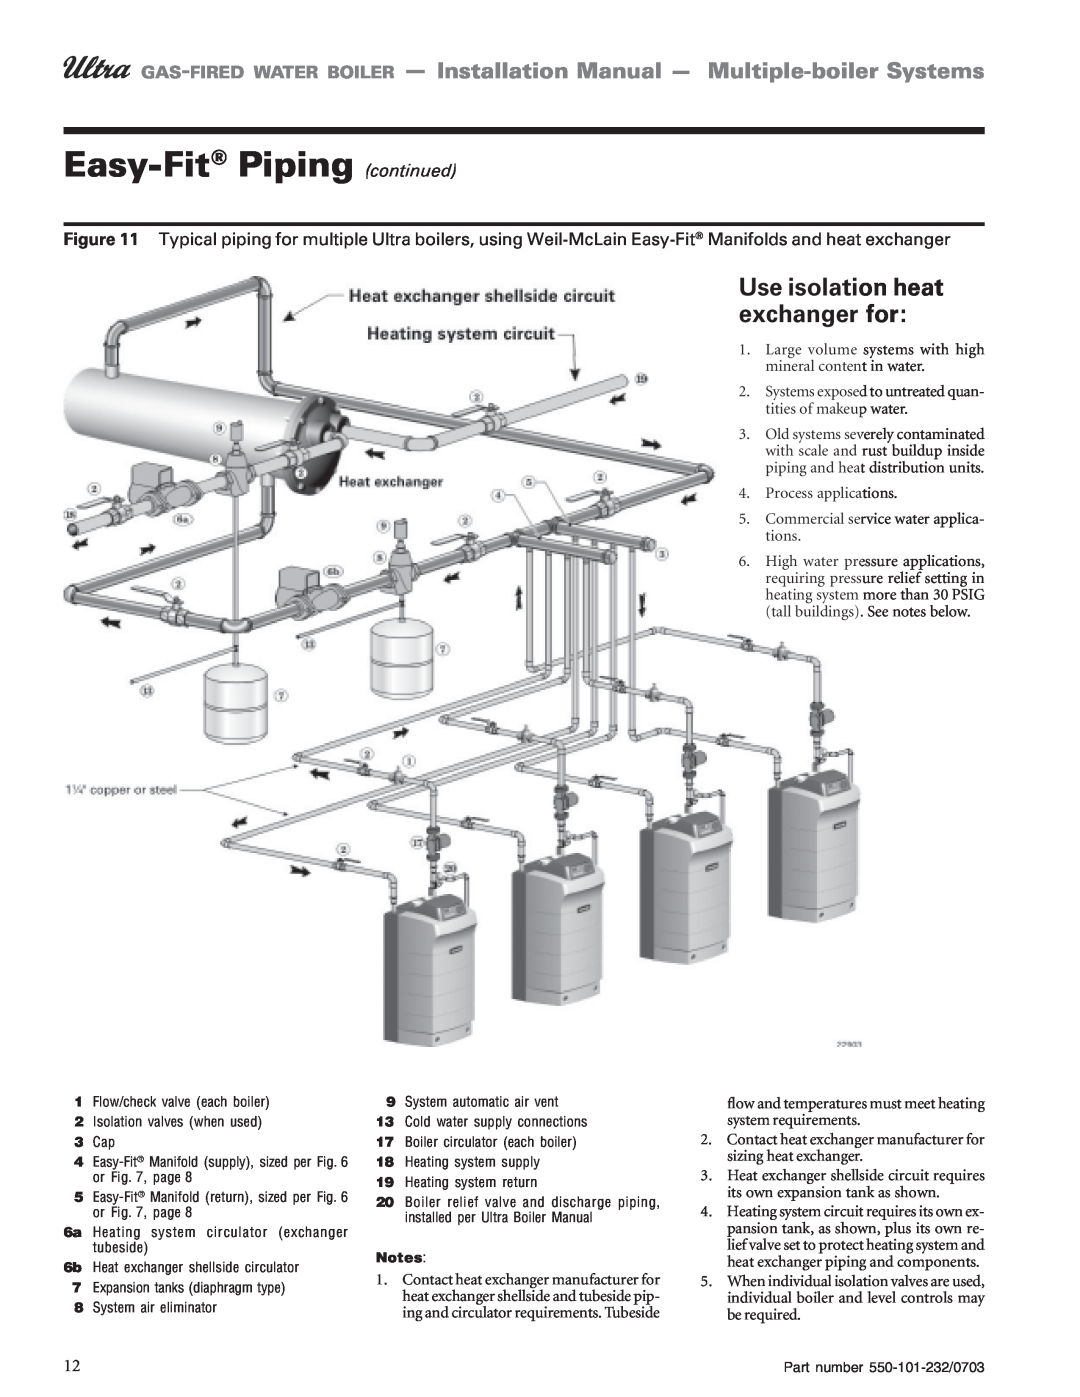 Weil-McLain Boiler installation manual Easy-Fit Piping continued, Use isolation heat exchanger for, Process applications 